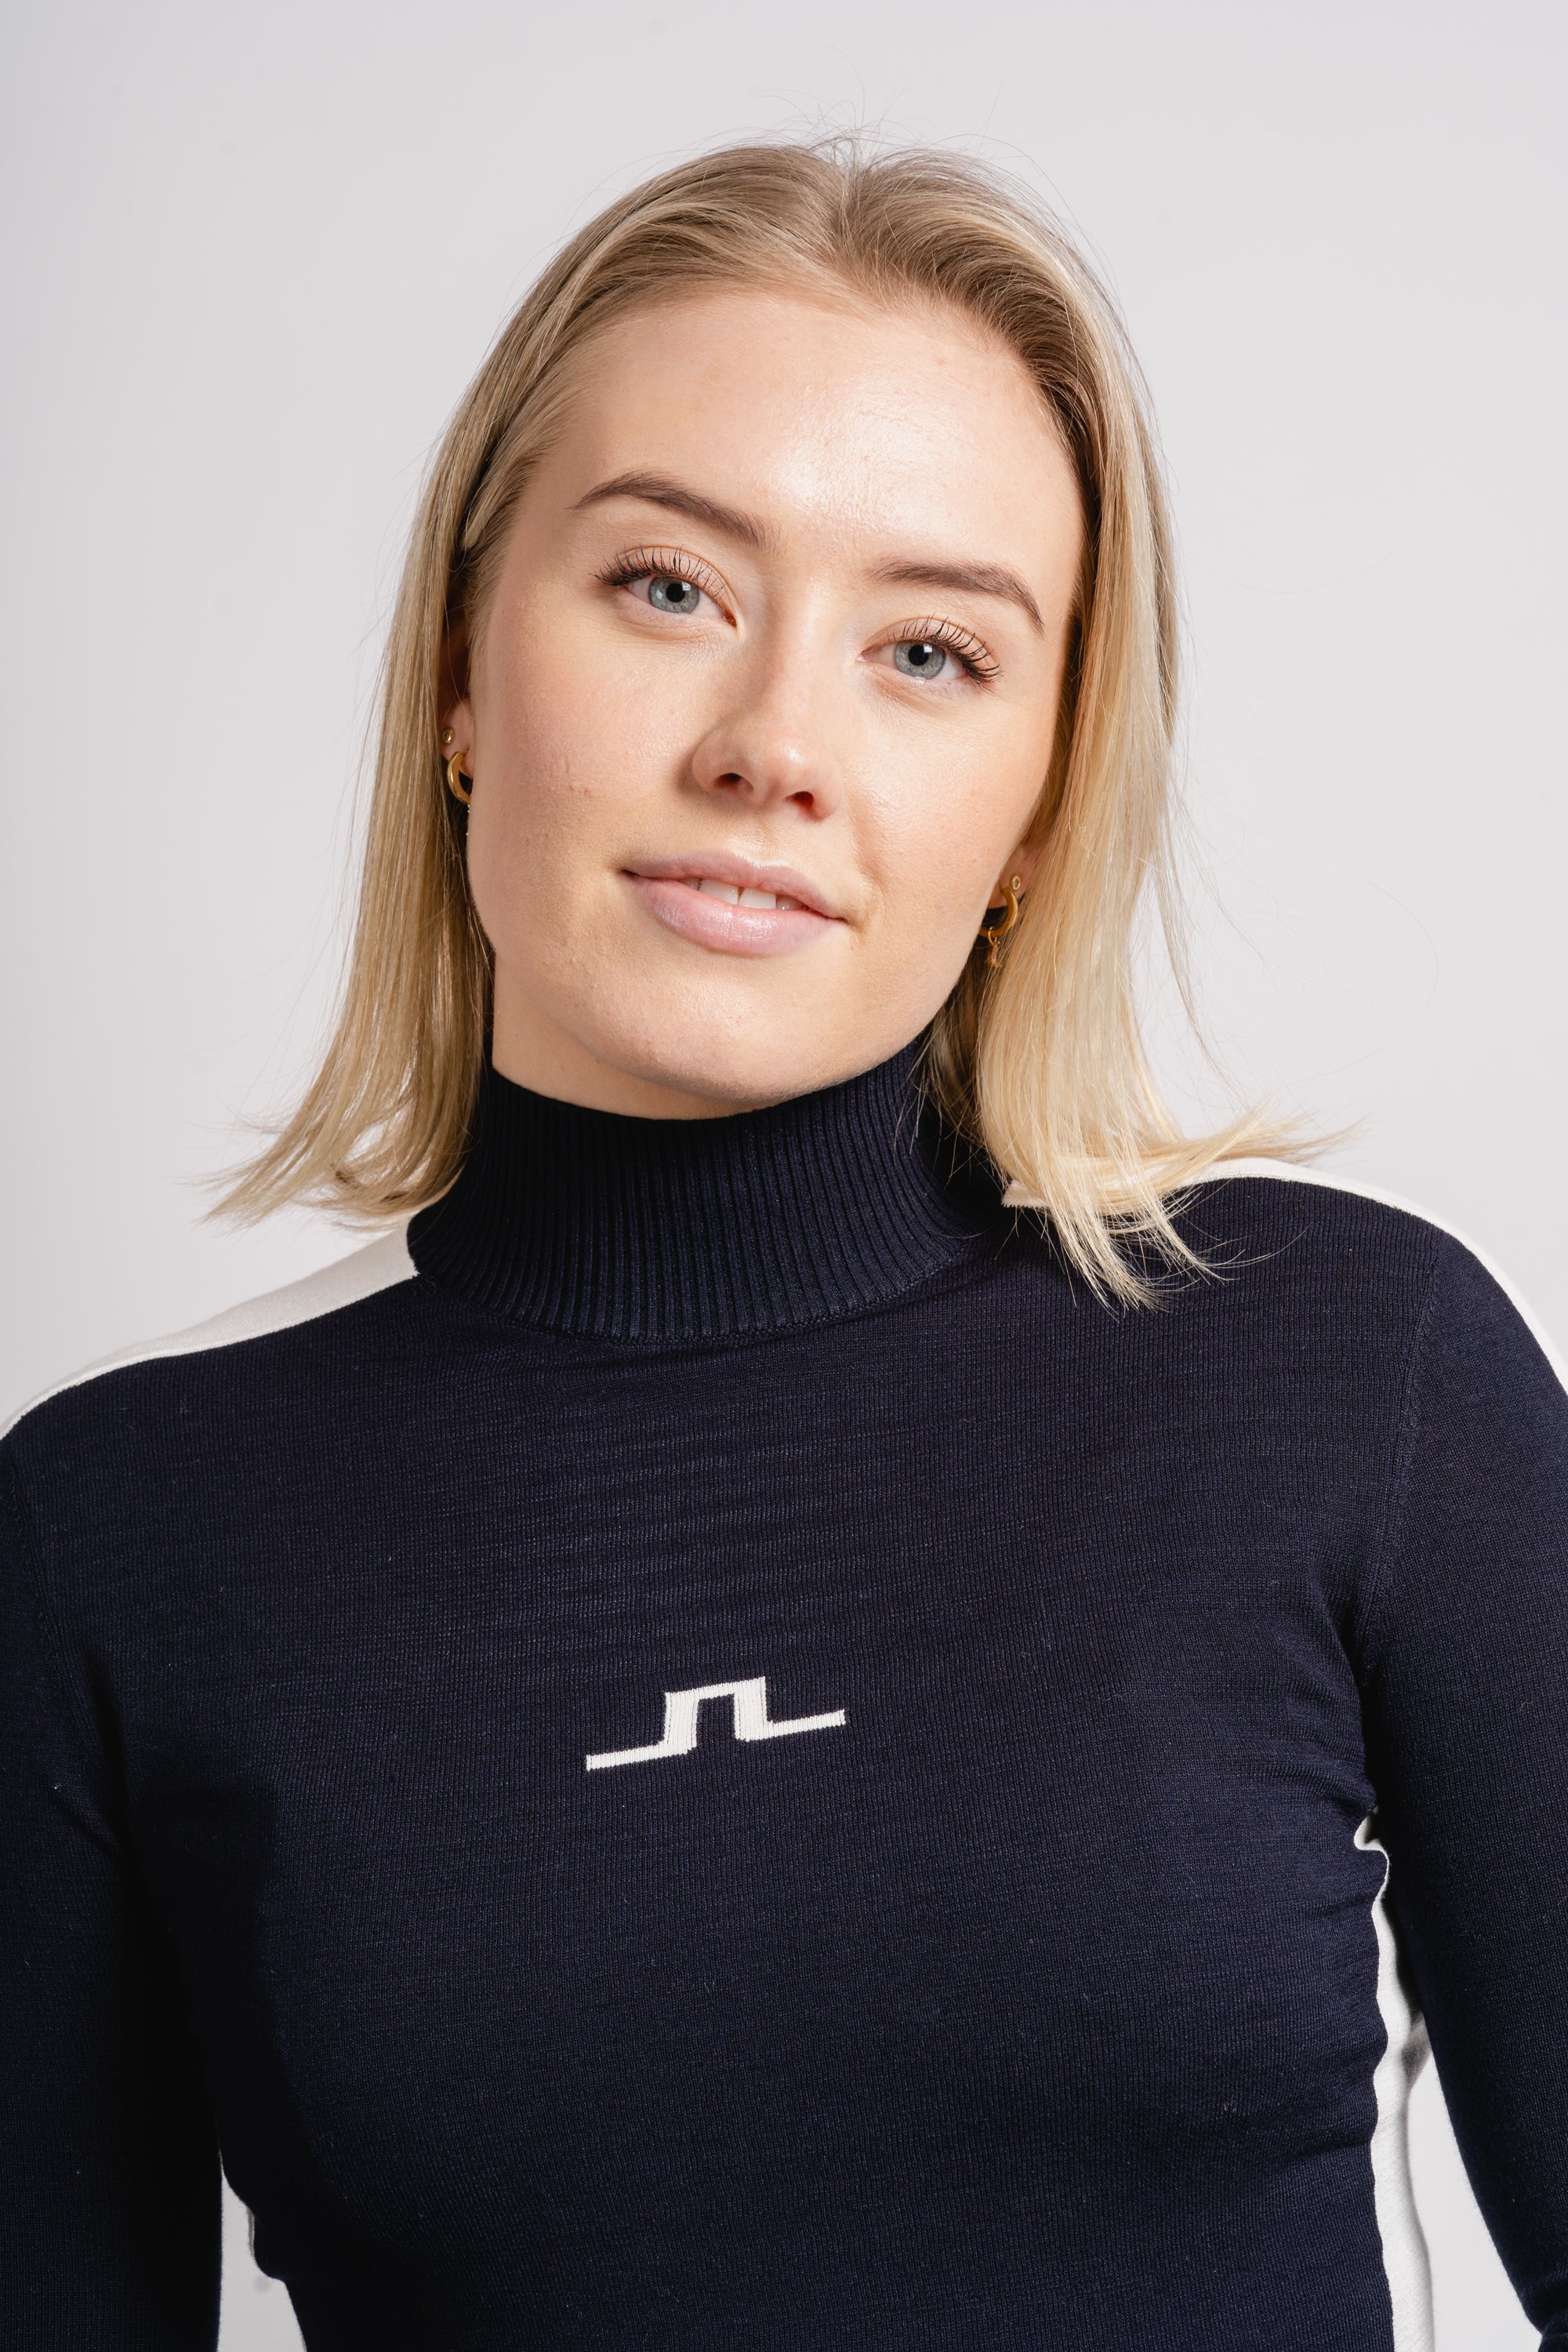 Adia Knitted Sport Sweater SS - Jl Navy